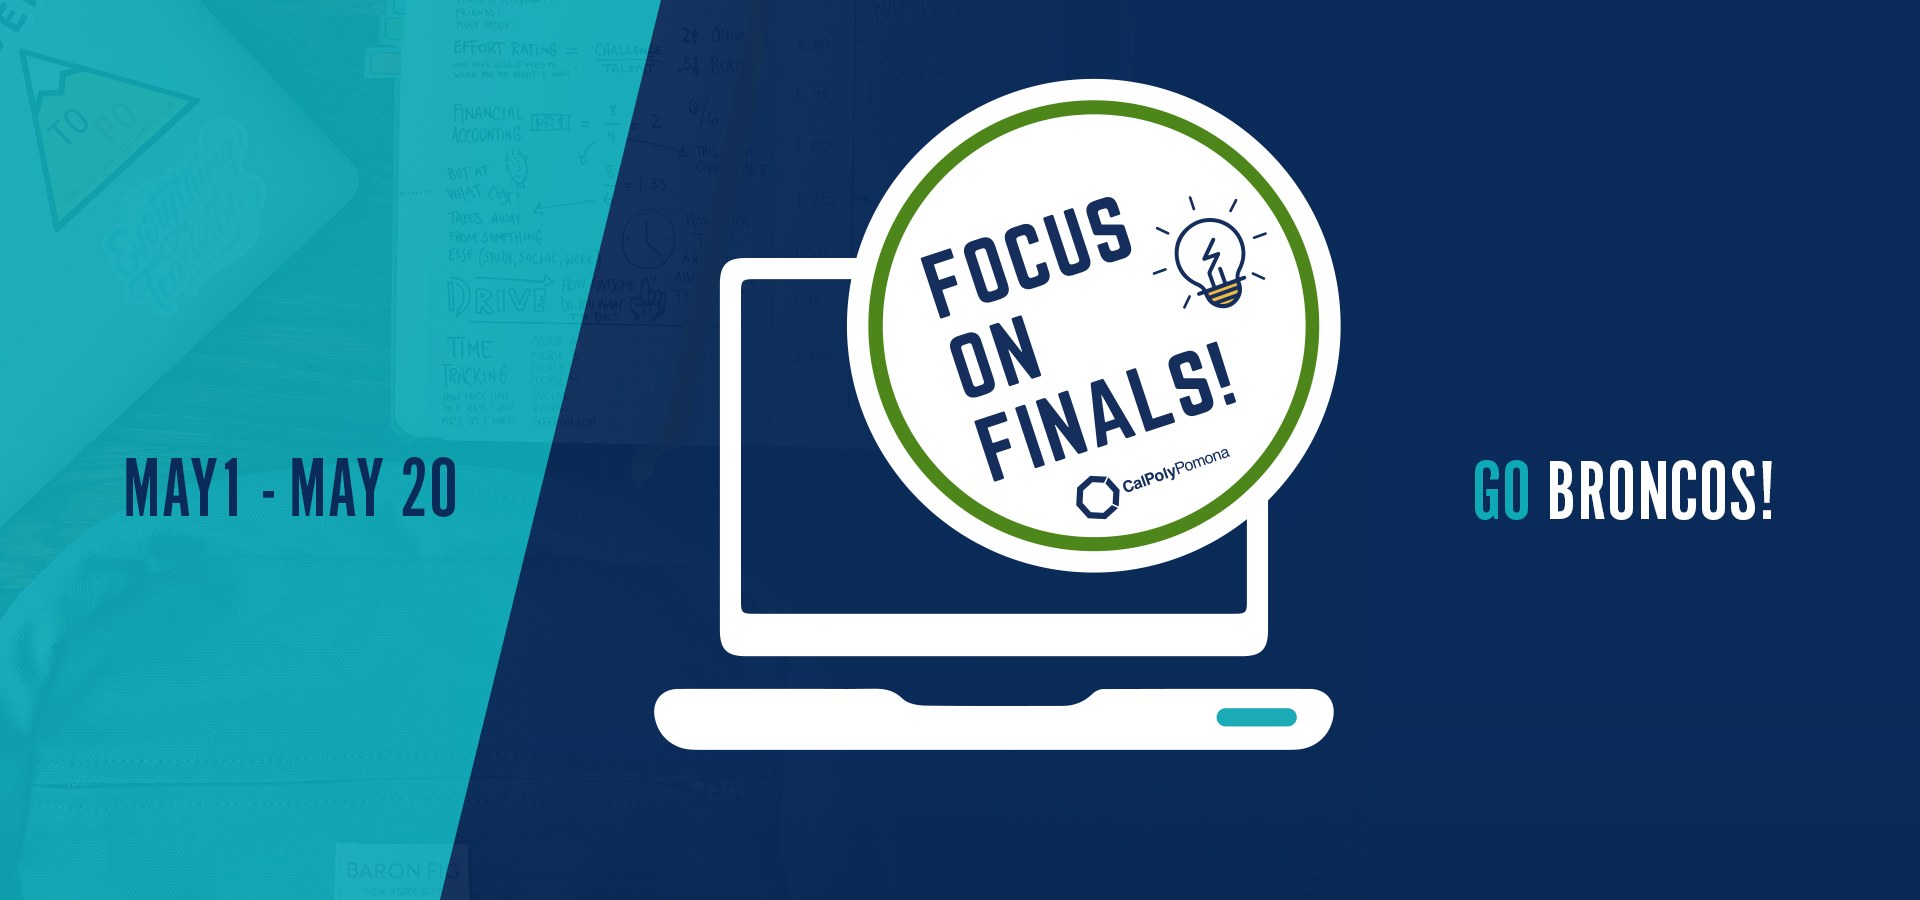 Focus on Finals: May 1 to May 20